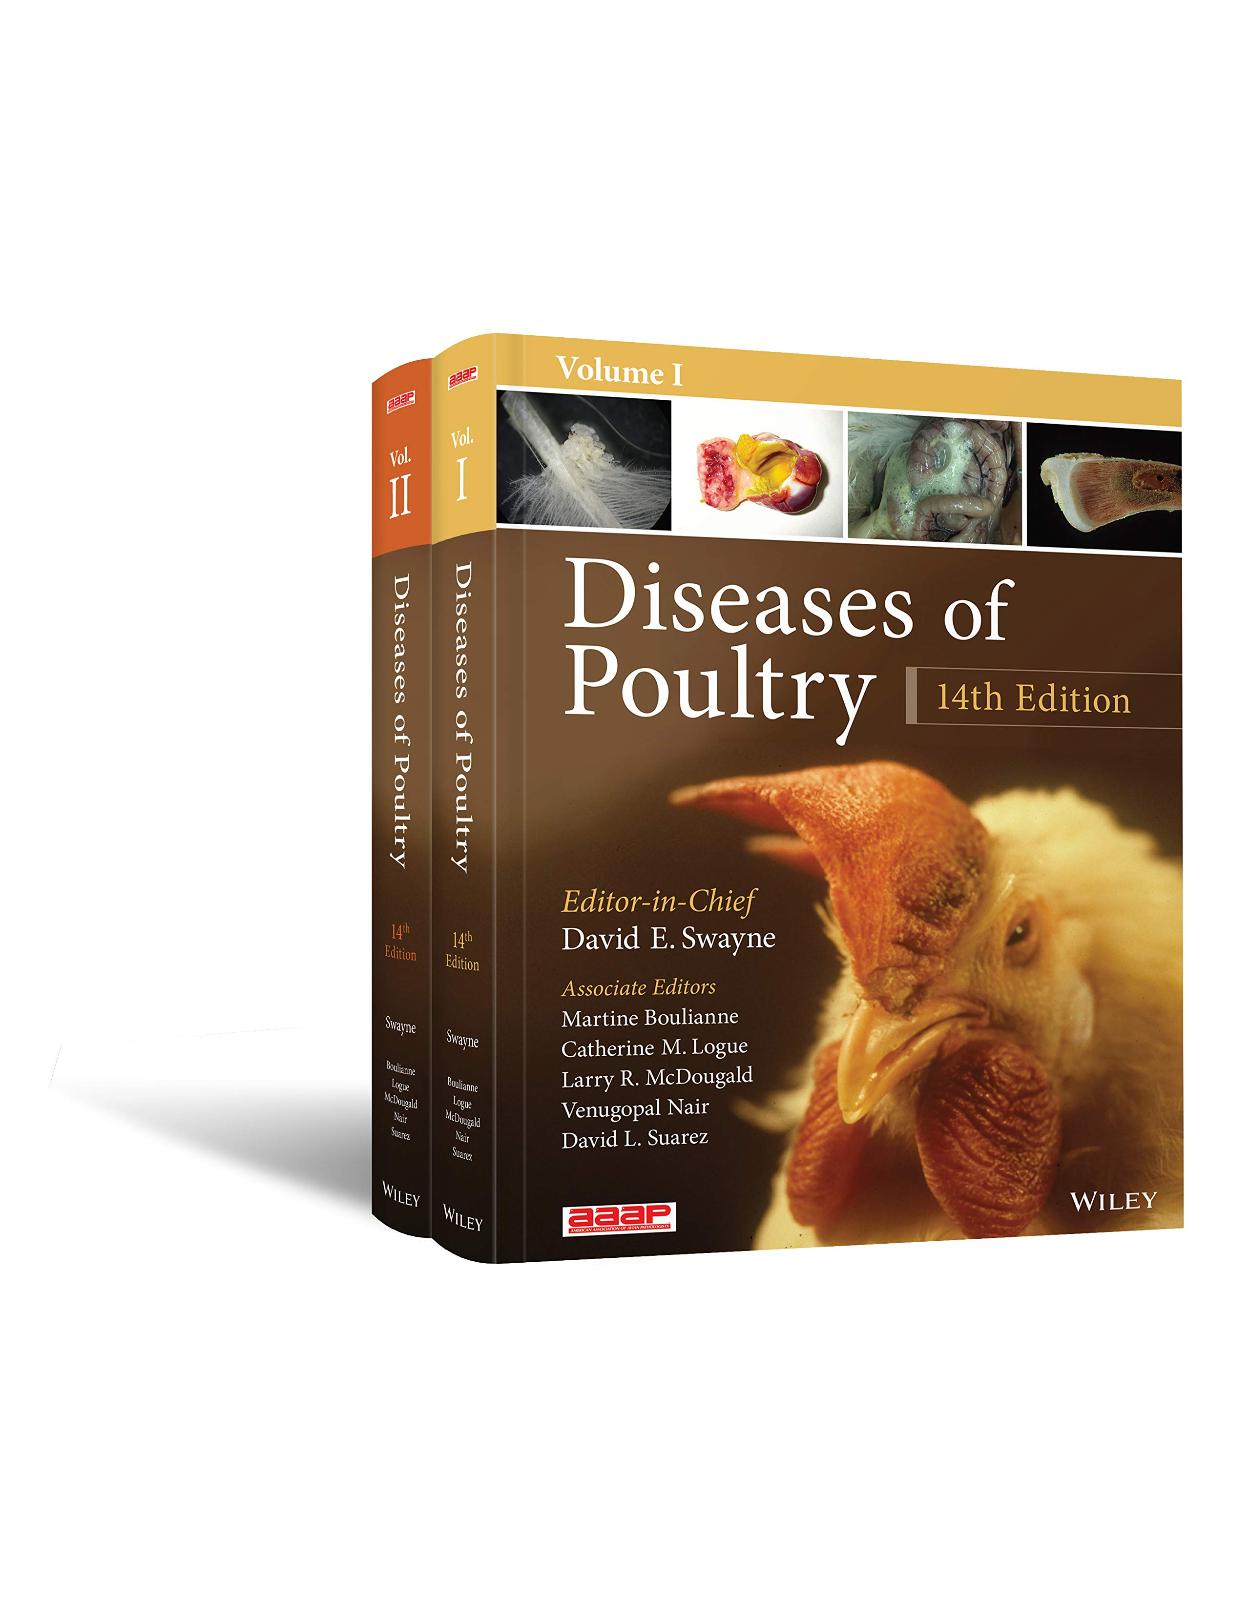 Diseases of Poultry: 2 Volume Set